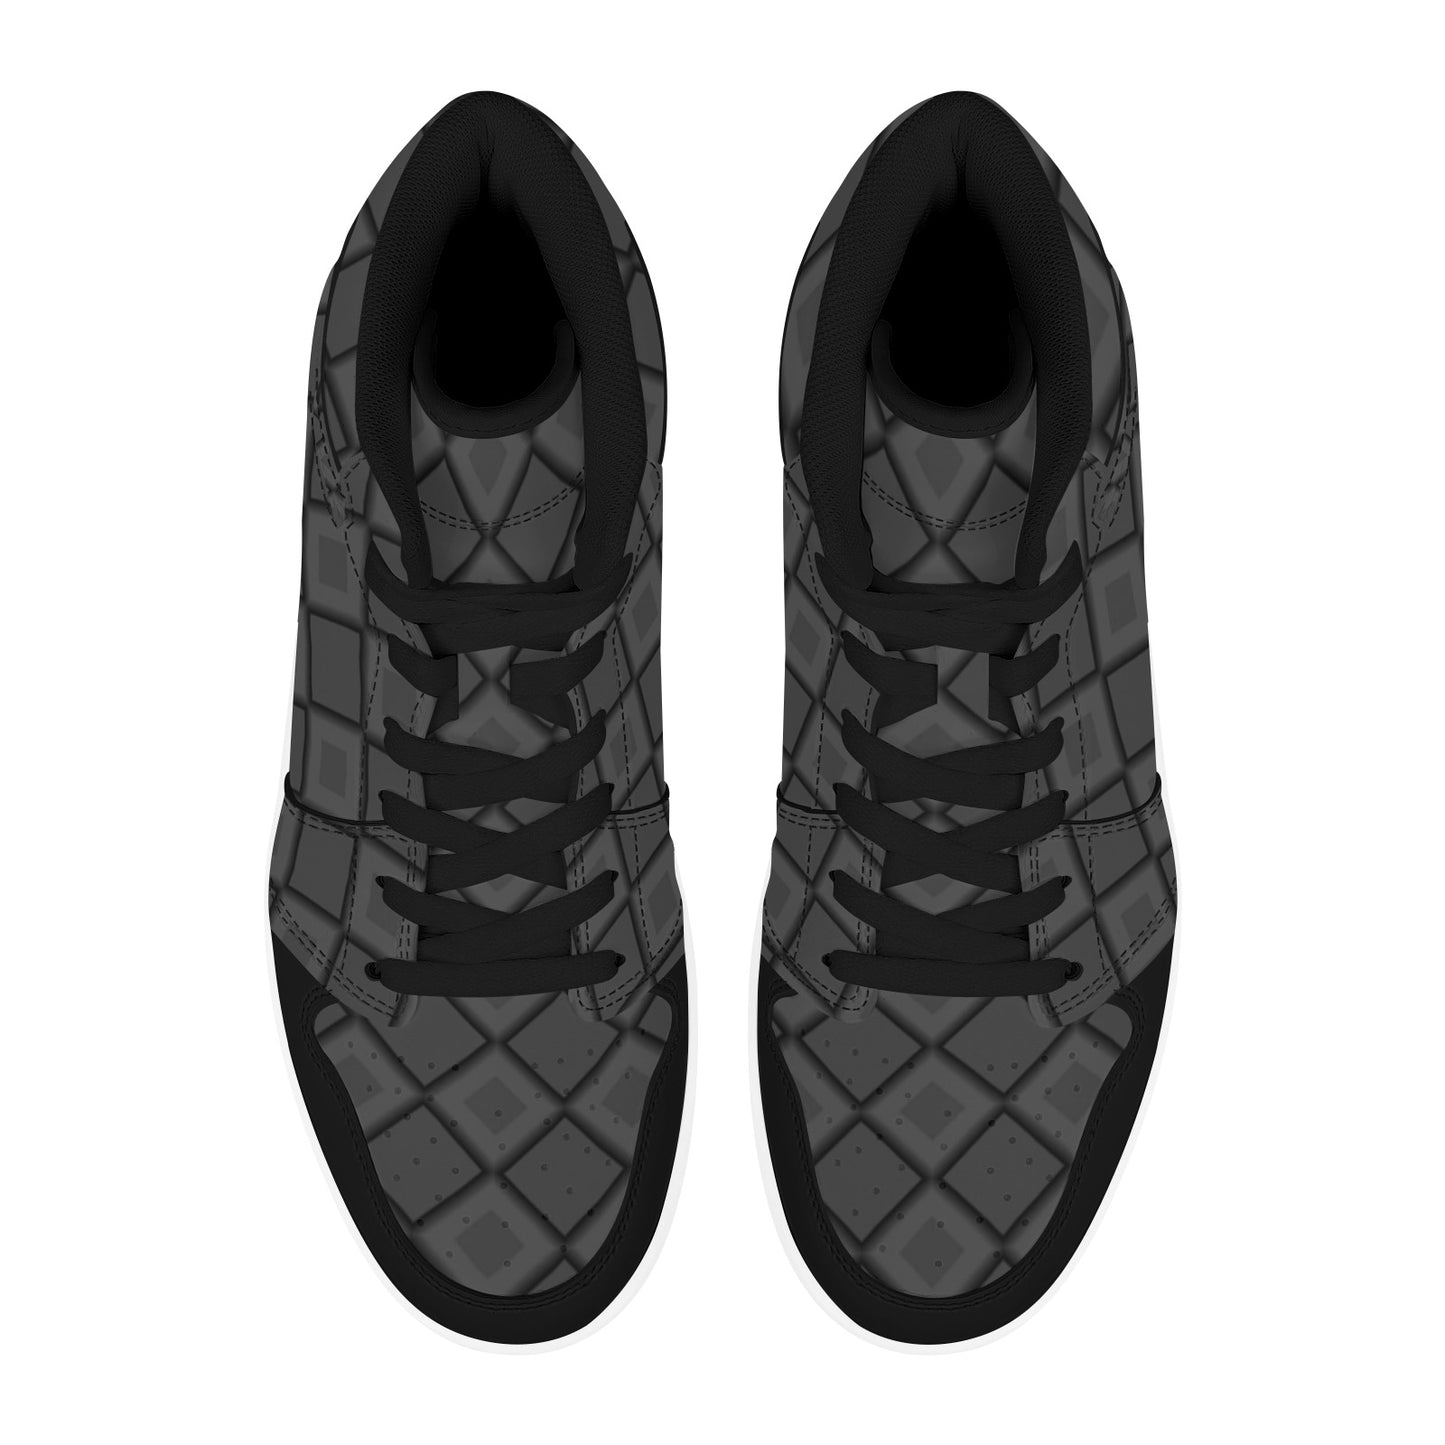 Black High Top Sneakers Squares Pattern High Top Sneakers Men's High Top Sneakers